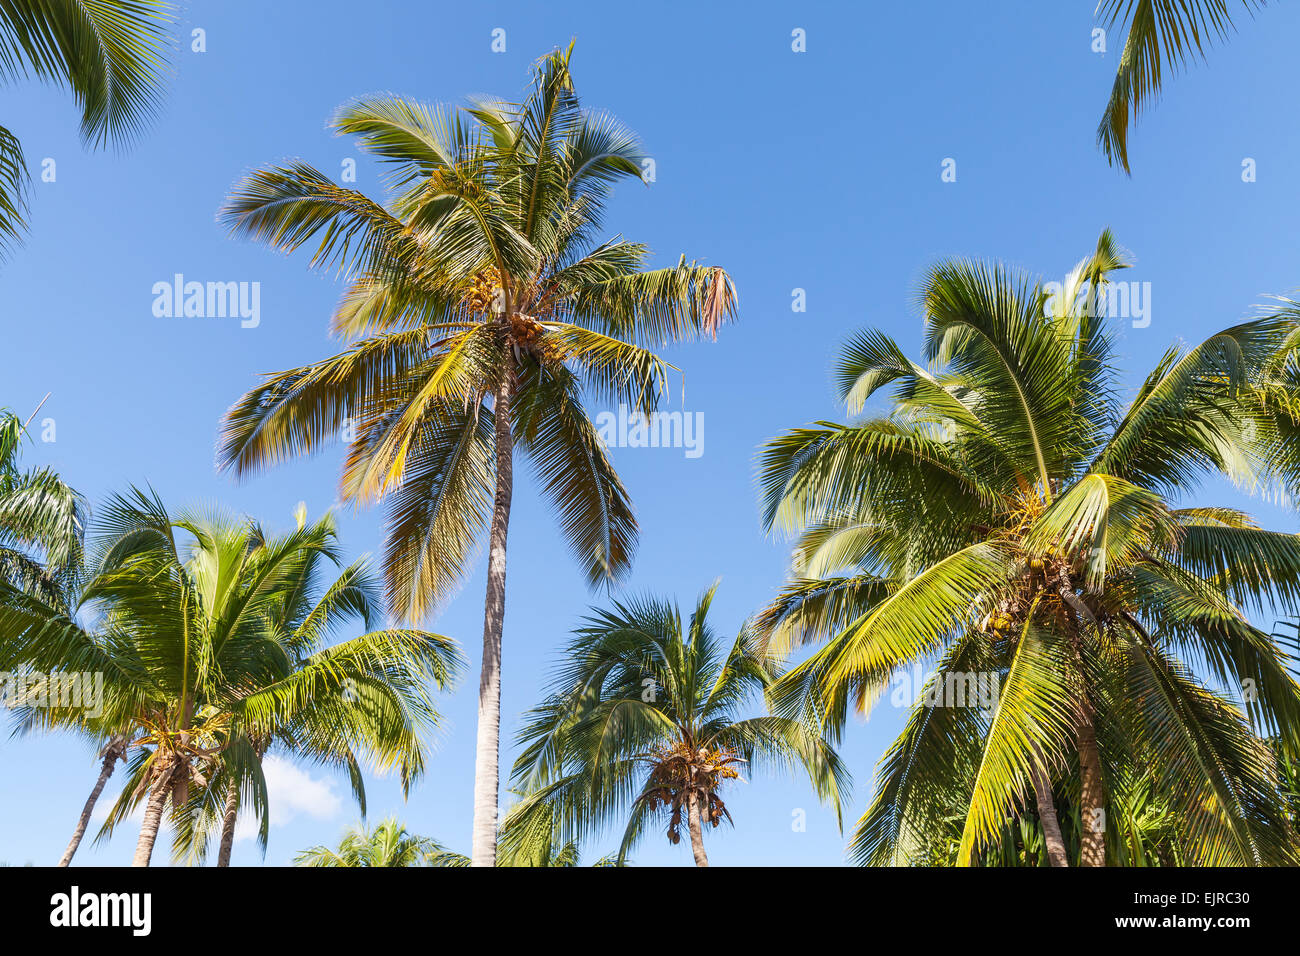 Forest of coconut palm trees over clear blue sky background Stock Photo